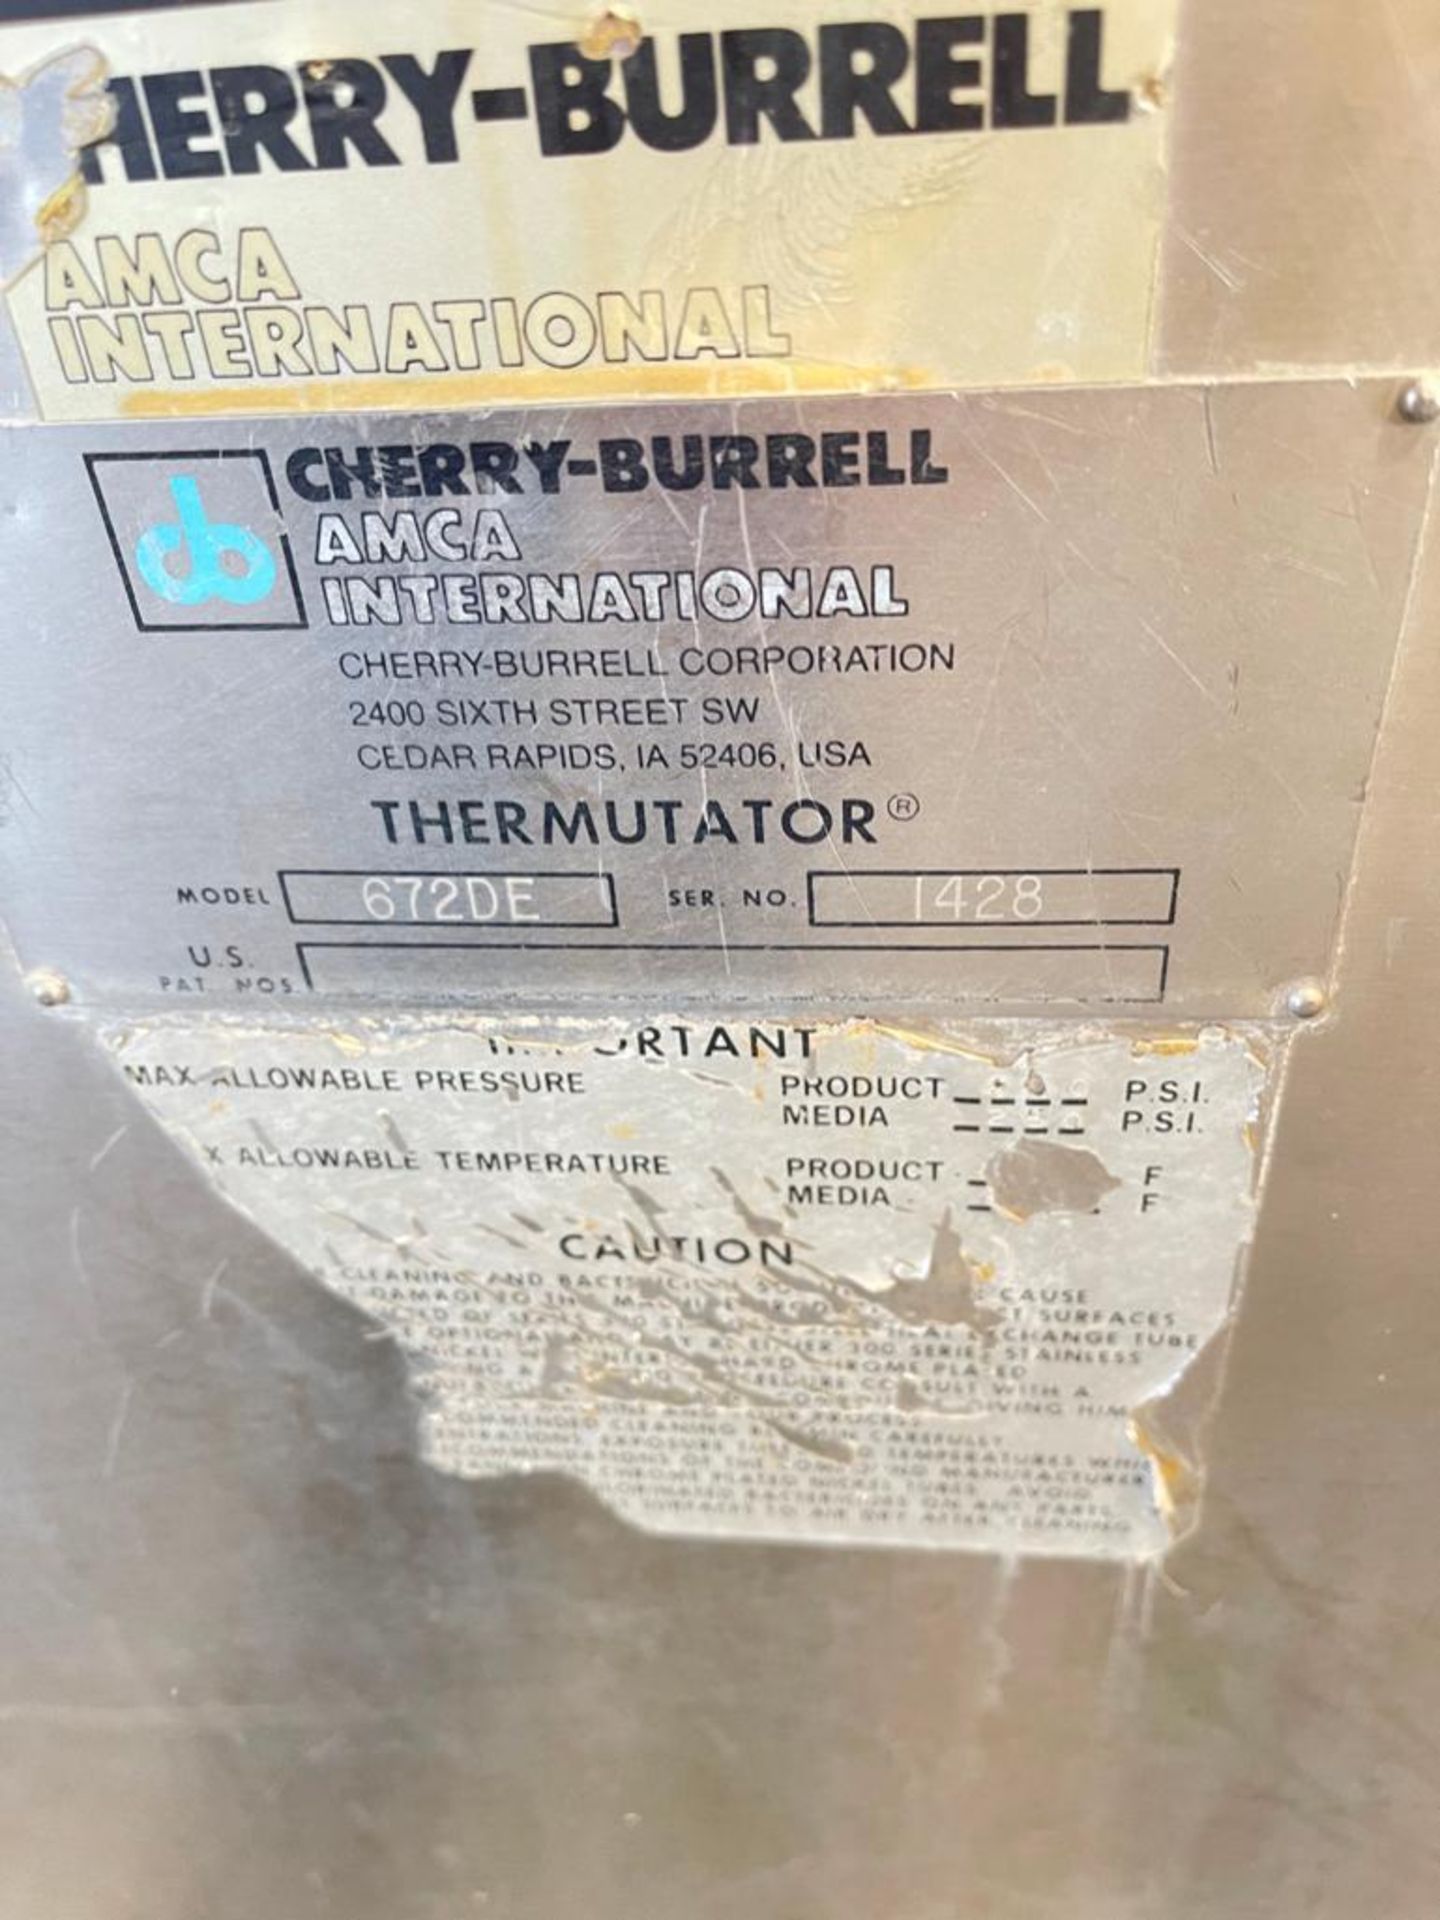 Cherry-Burrell S/S Thermulator, Model: 6720E, S/N: 1428 - Rigging Fees: $150 - Image 2 of 2